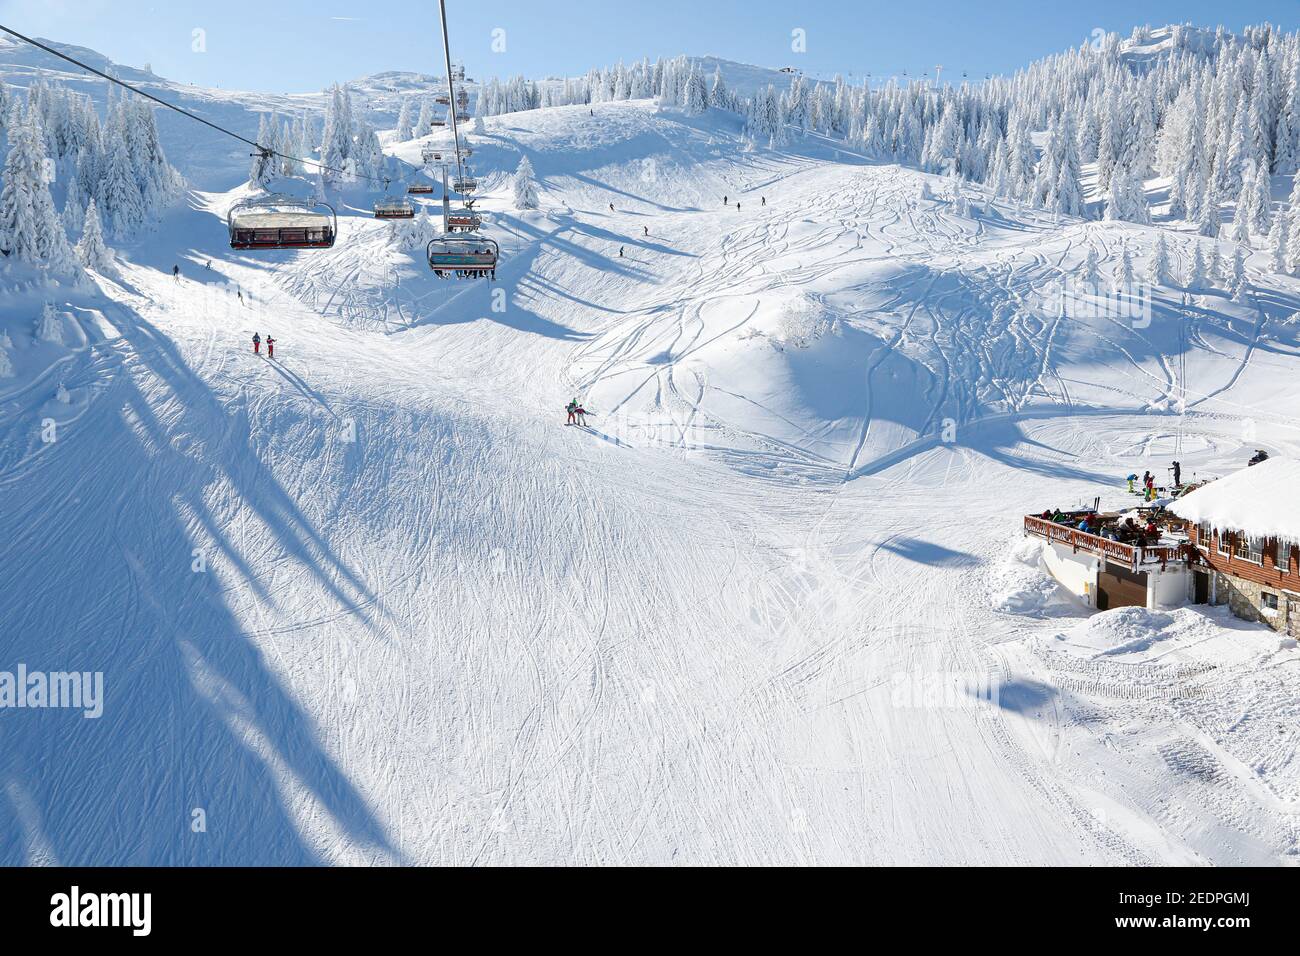 The ski resort Jahorina is located near Bosnian capital of Sarajevo. The winter sports area is situated between the elevations of 1,300 and 1,916 m. Stock Photo